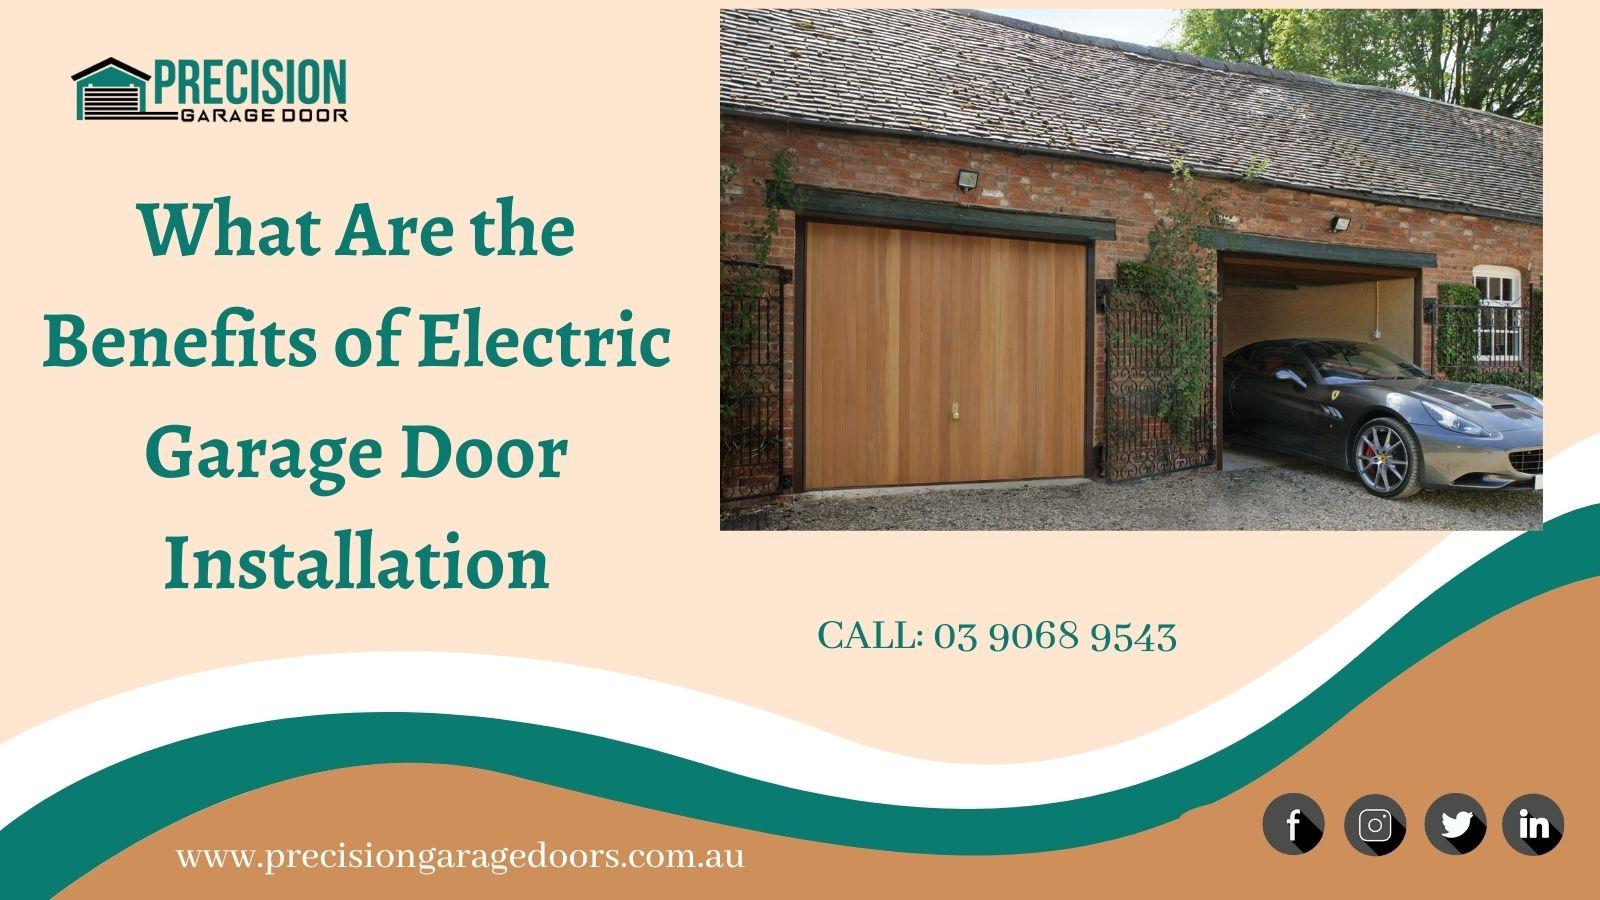 What Are the Benefits of Electric Garage Door Installation